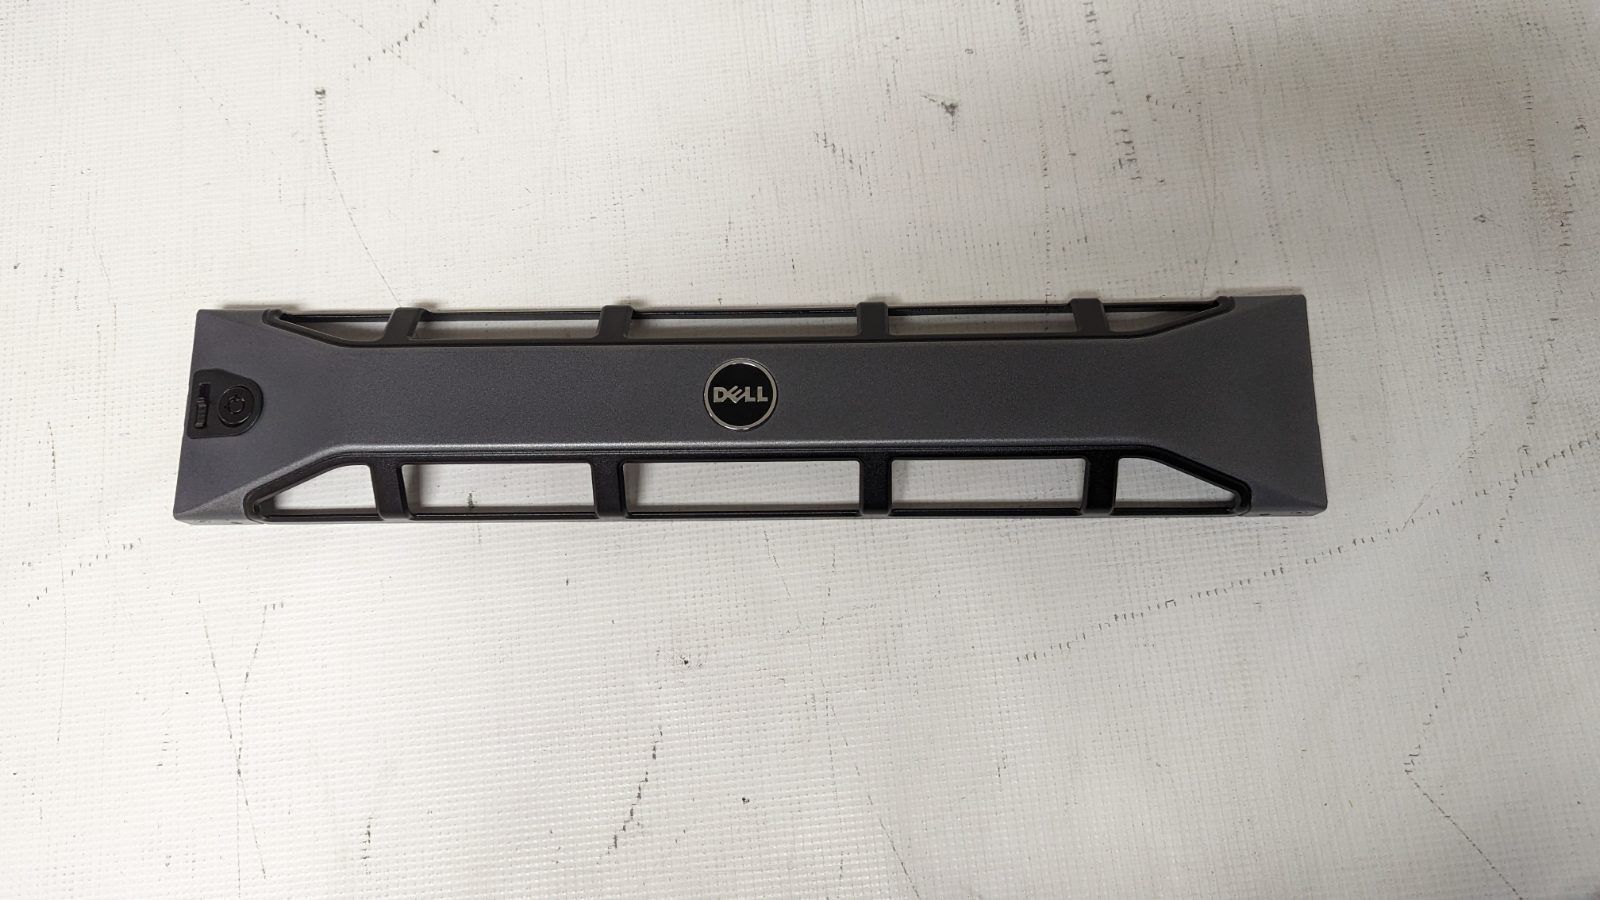 Dell Poweredge R730 R720 R820 R520 Server Front Bezel with Key